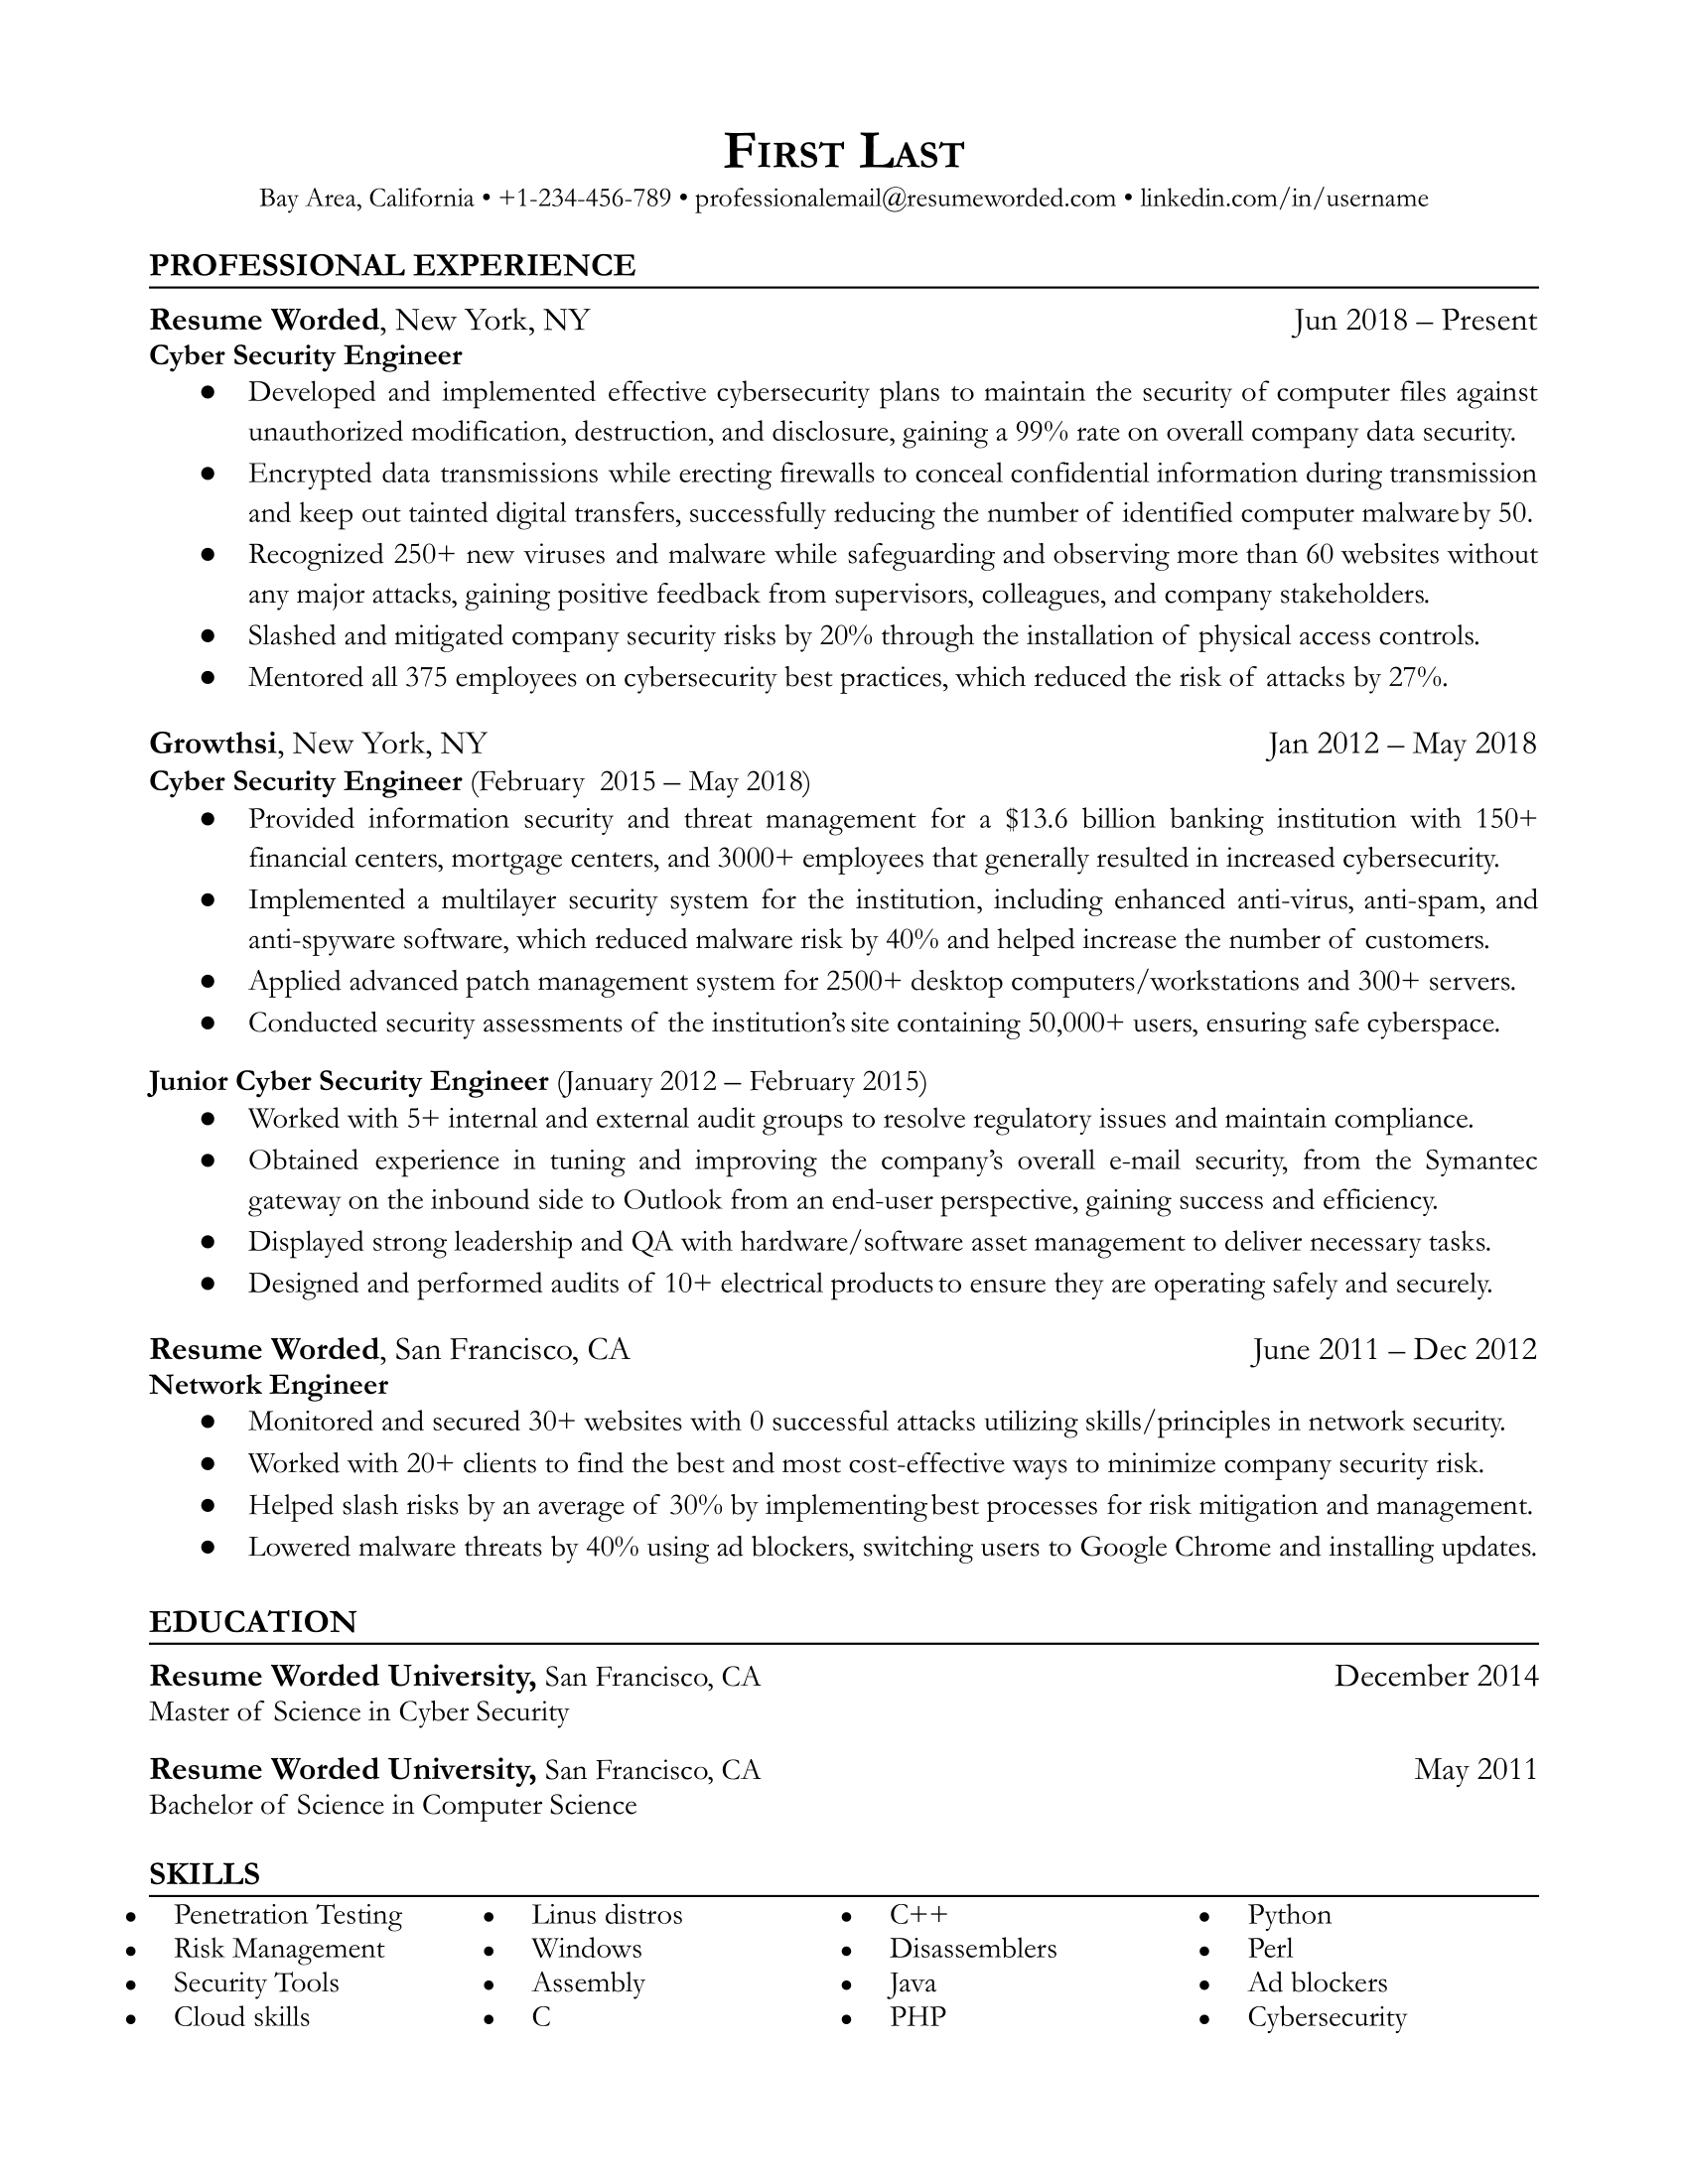 Cyber Security Engineer Resume Template + Example